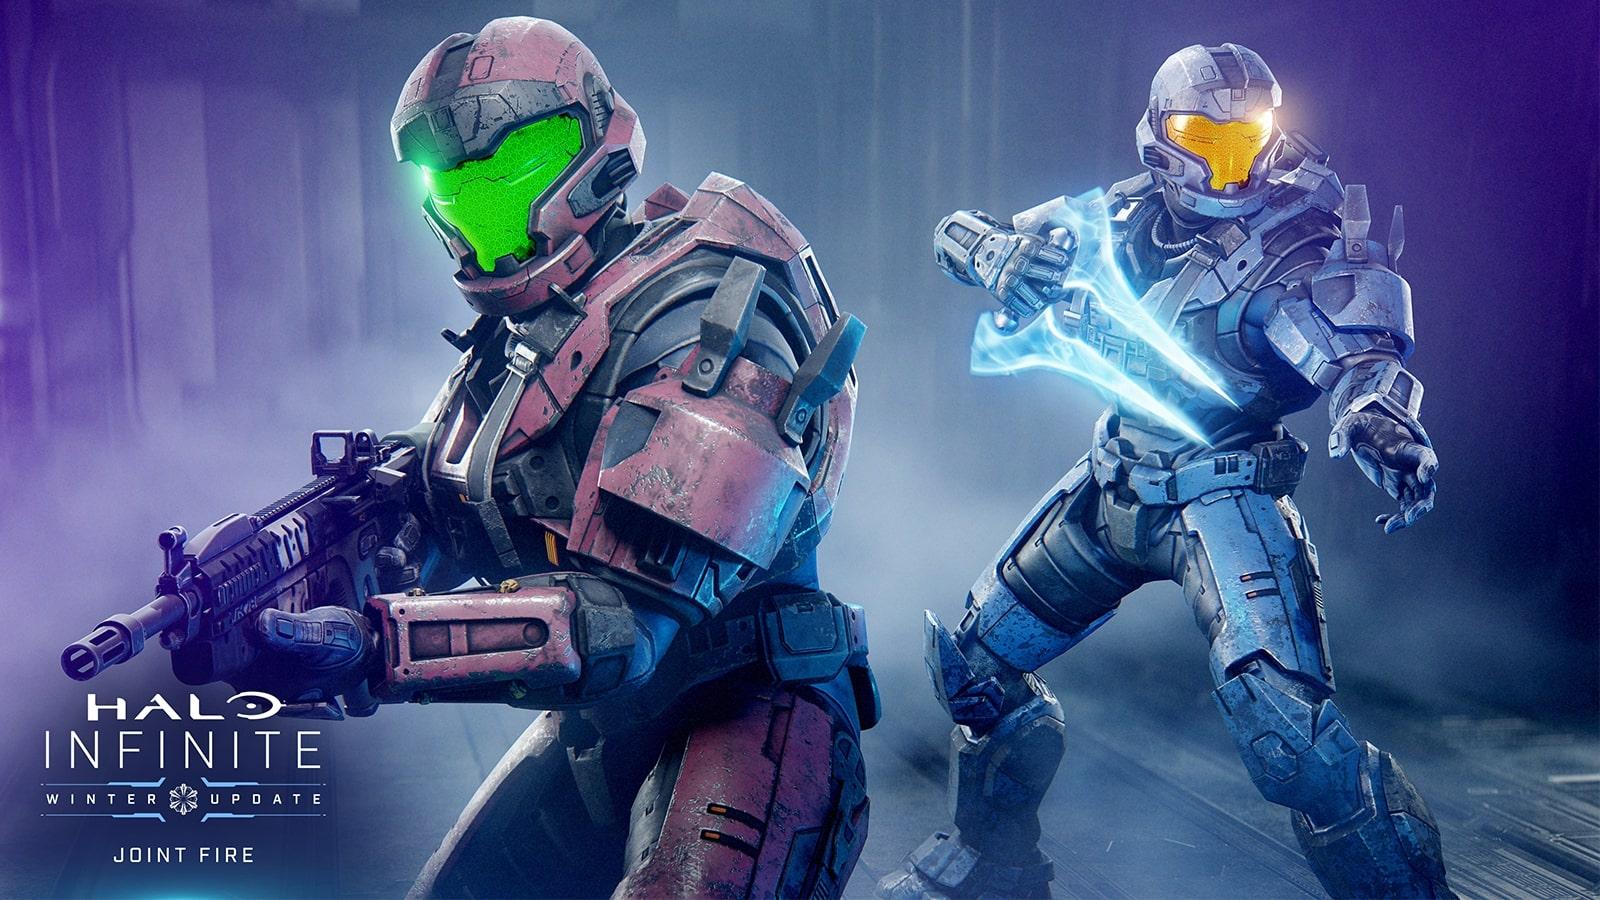 Halo Infinite Joint Fire header